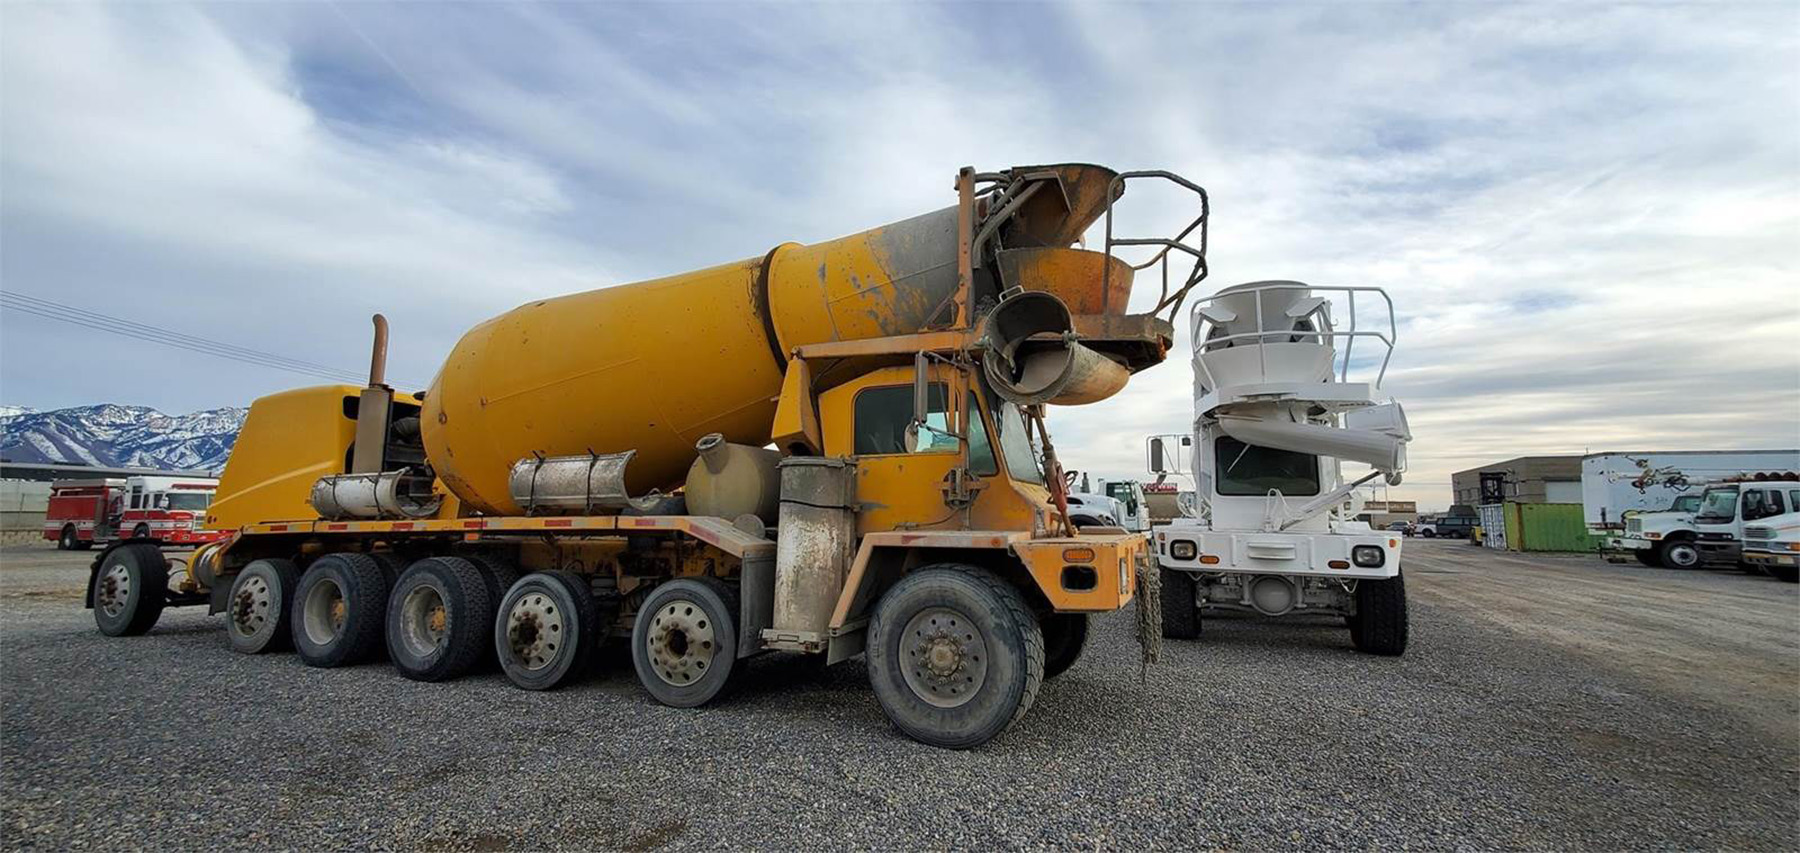 large yellow front load concrete truck holding 14 cubic yards of concrete